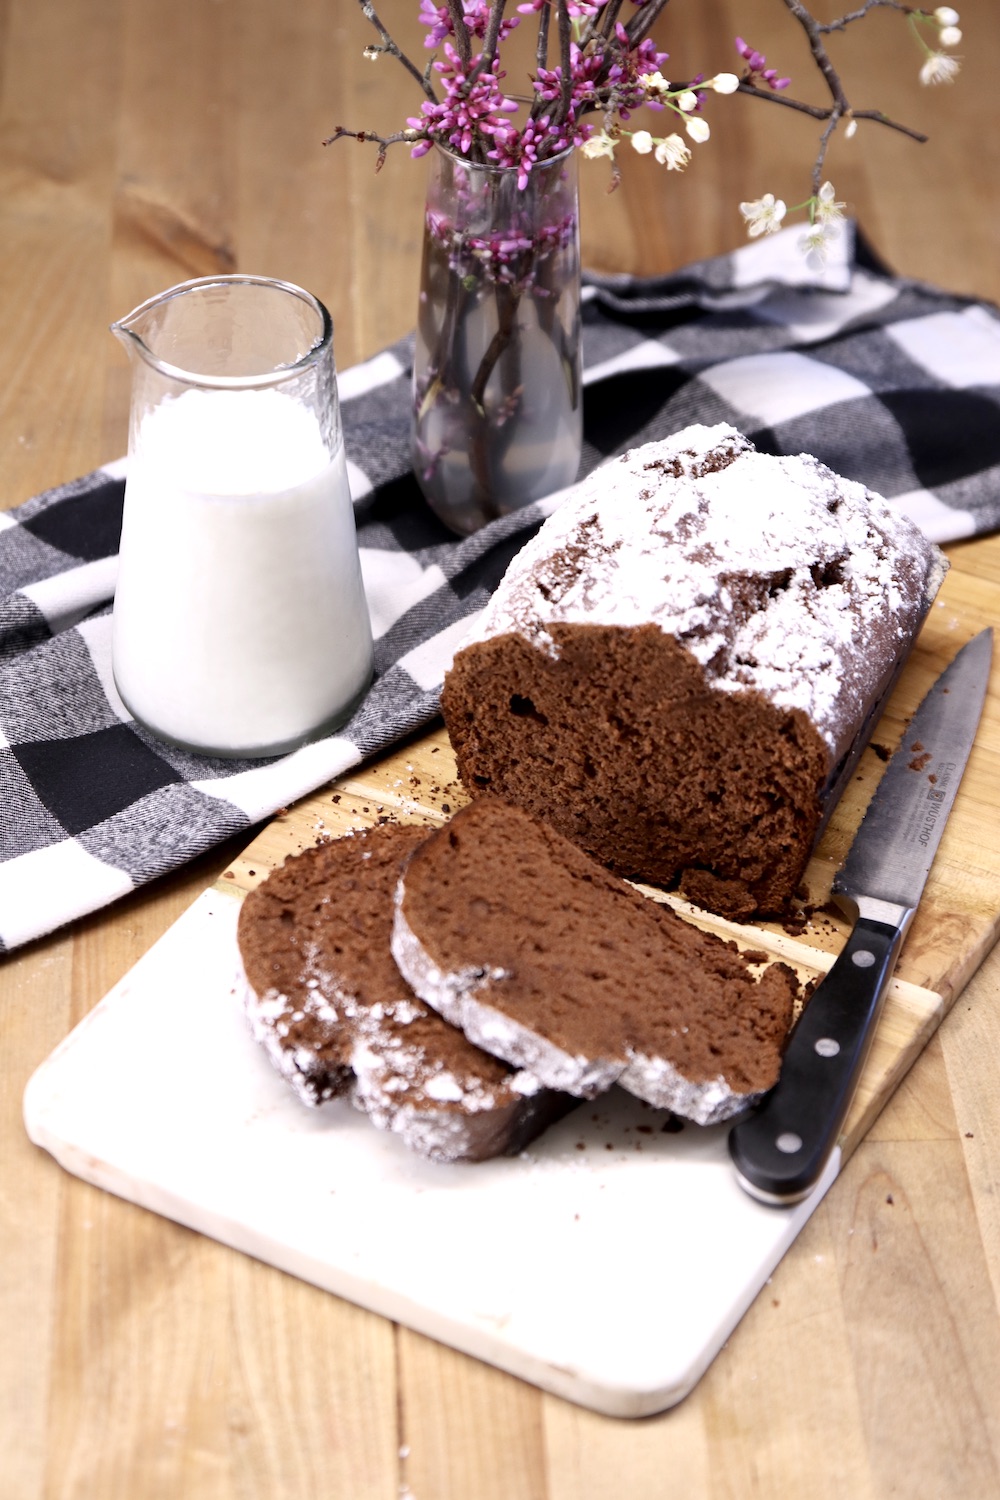 Chocolate banana bread with small milk jug and flowers